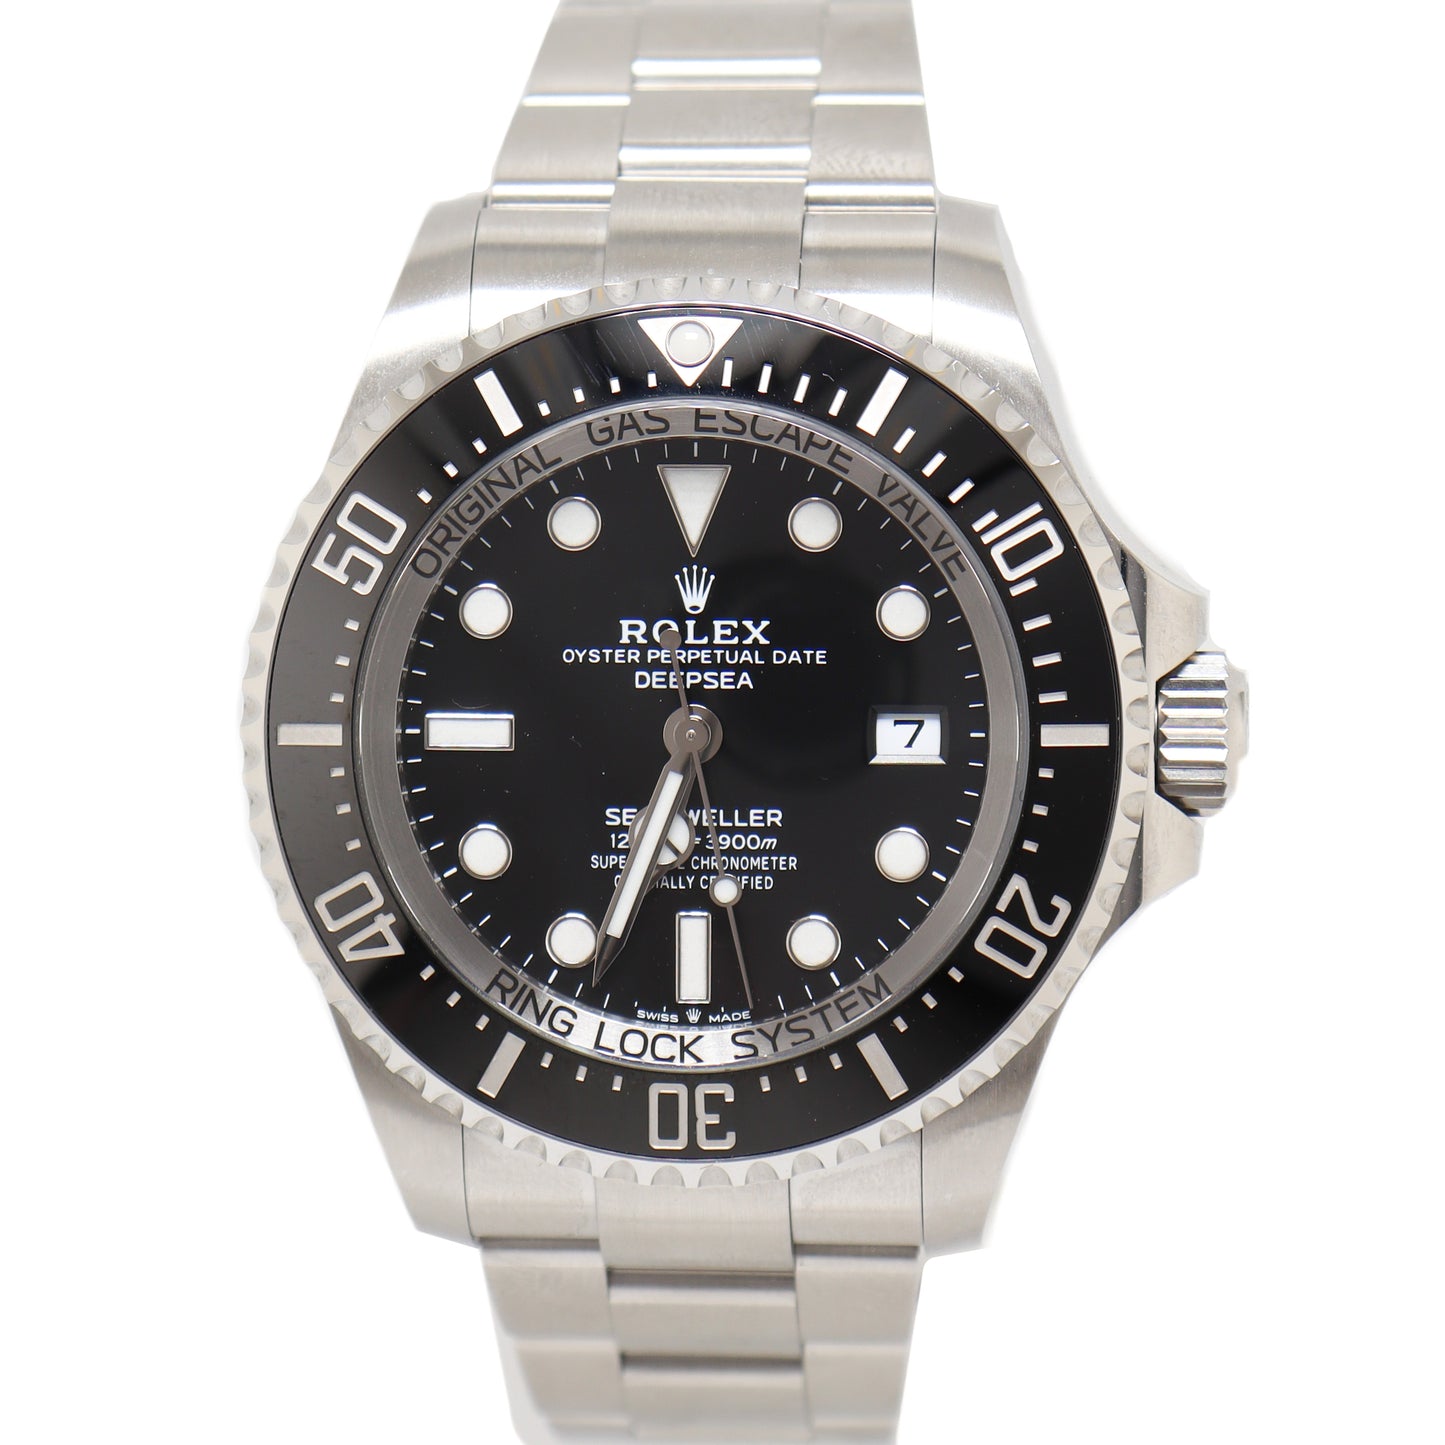 Load image into Gallery viewer, Rolex Mens Sea Dweller Stainless Steel Black Dot Dial Watch Reference# 136660 - Happy Jewelers Fine Jewelry Lifetime Warranty
